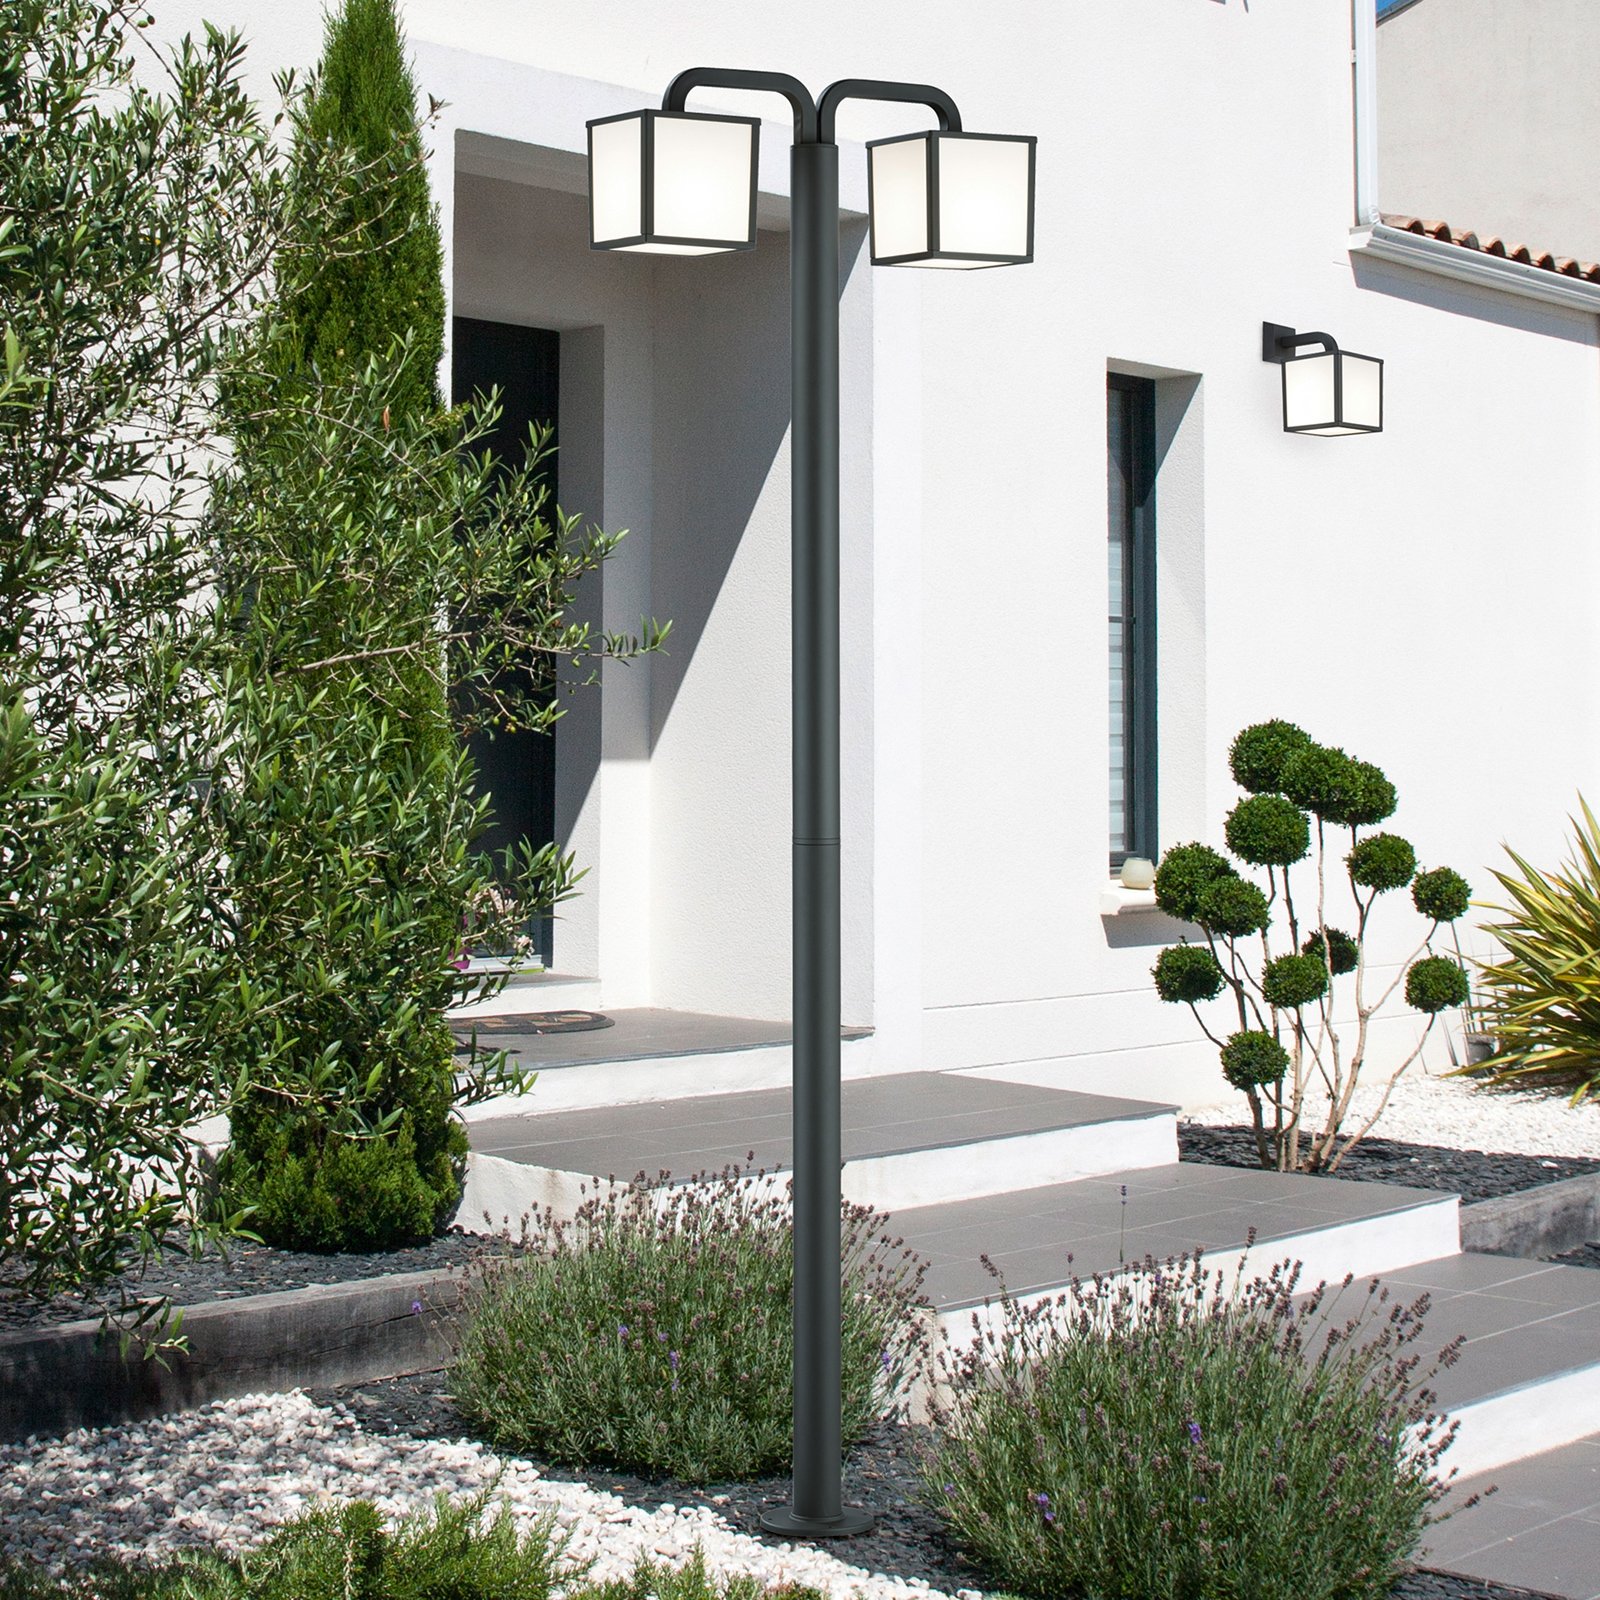 Cubango LED lamp post with two cubic lampshades